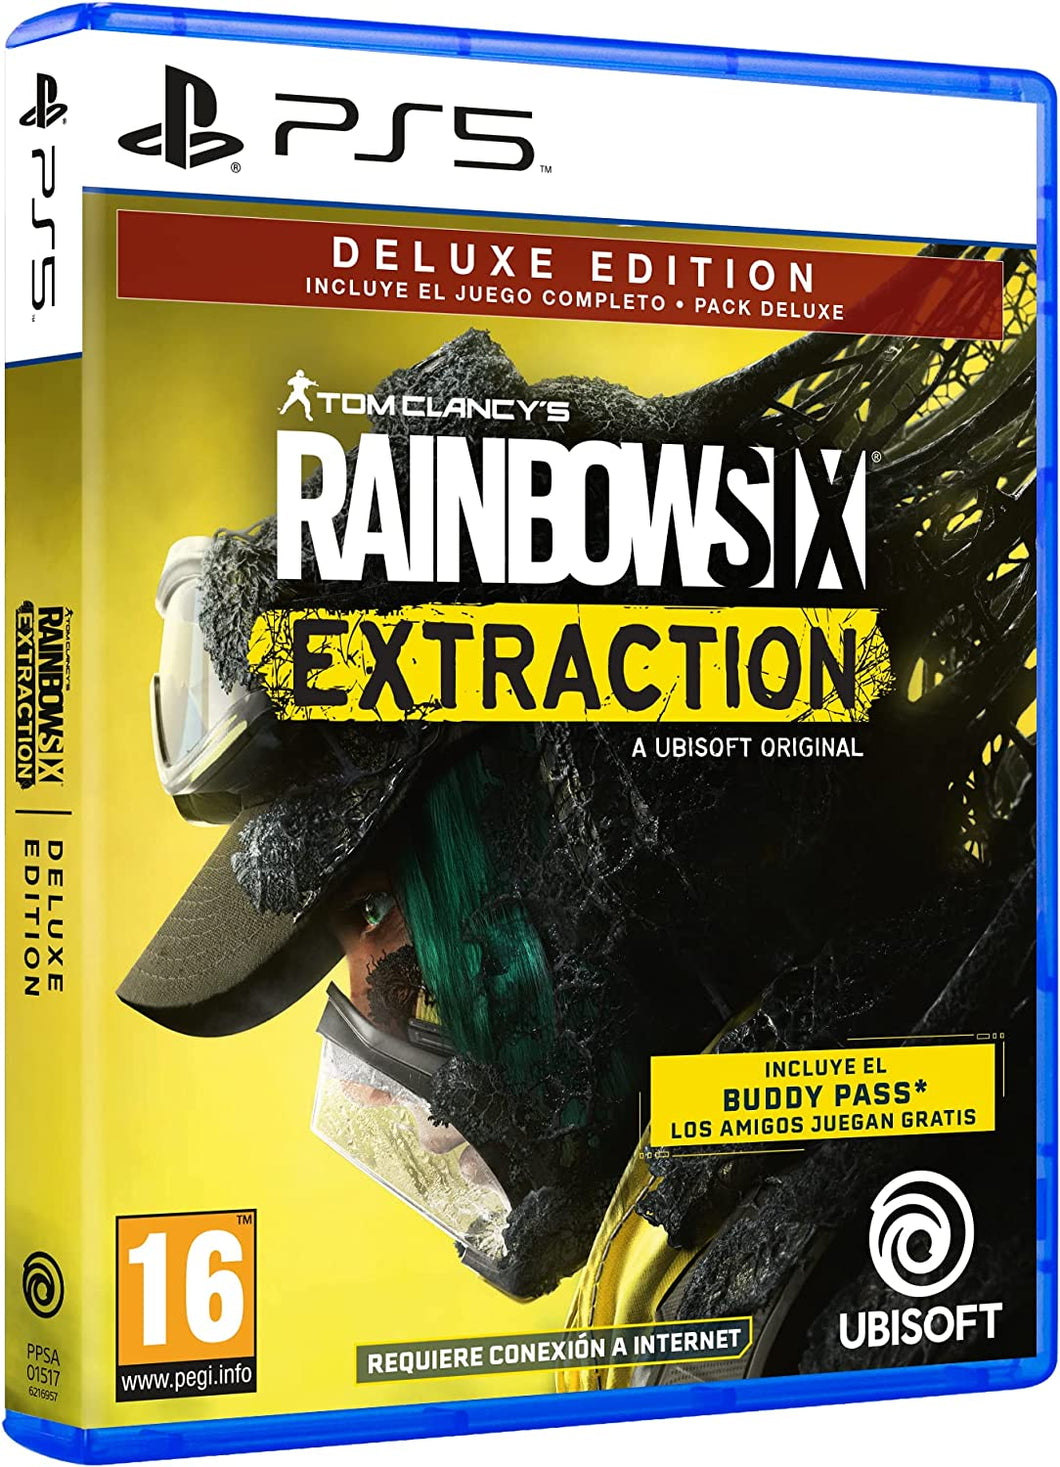 SONY PS5 GAME TOM CLANCY S RAINBOW SIX EXTRACTION DELUXE E